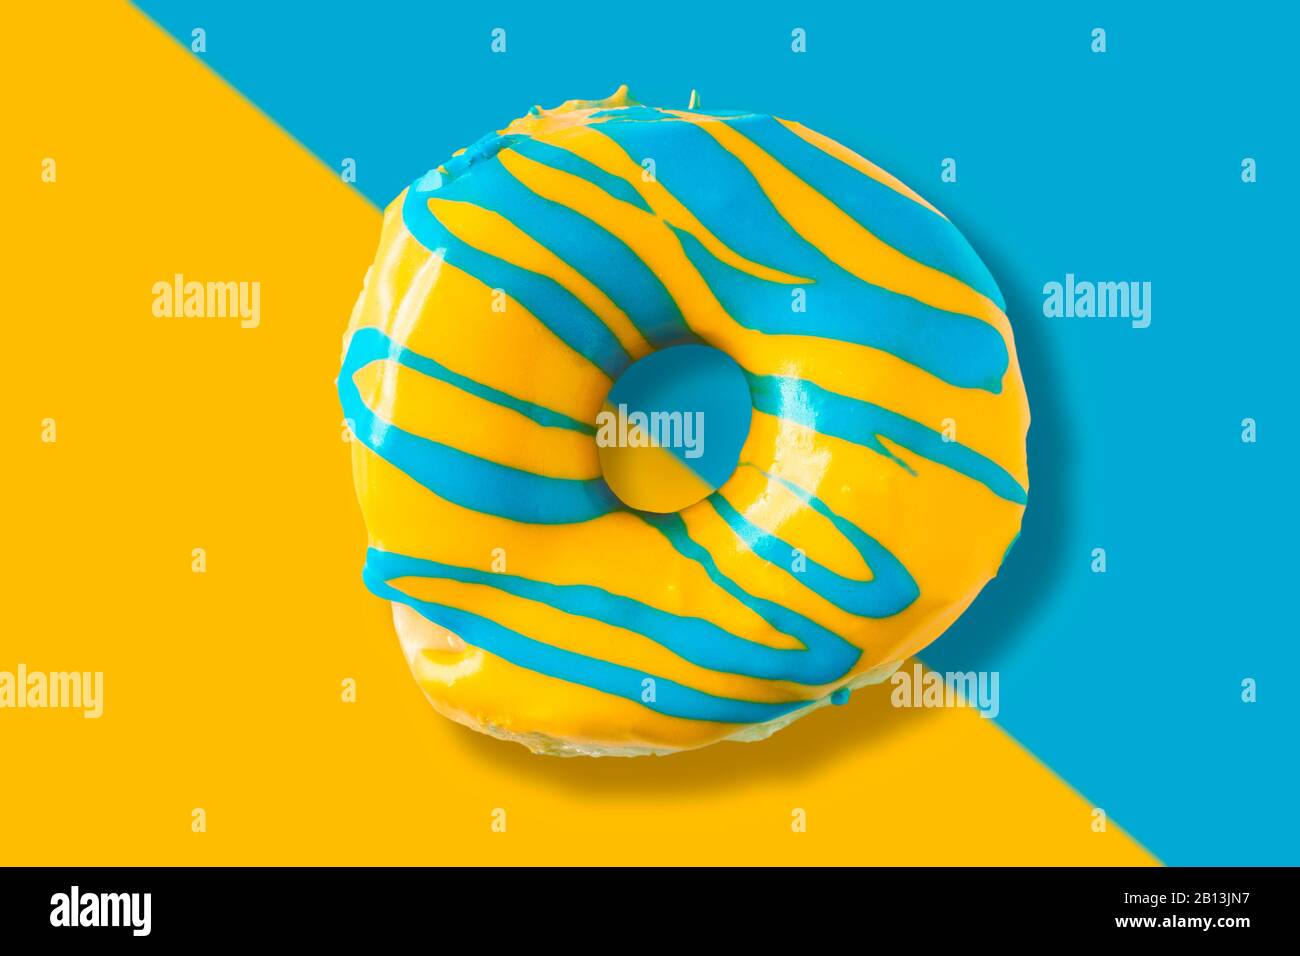 Colorful bright yellow and blue glazed  appetizing doughnut on split color background. Top view of yummy looking donut. Stock Photo